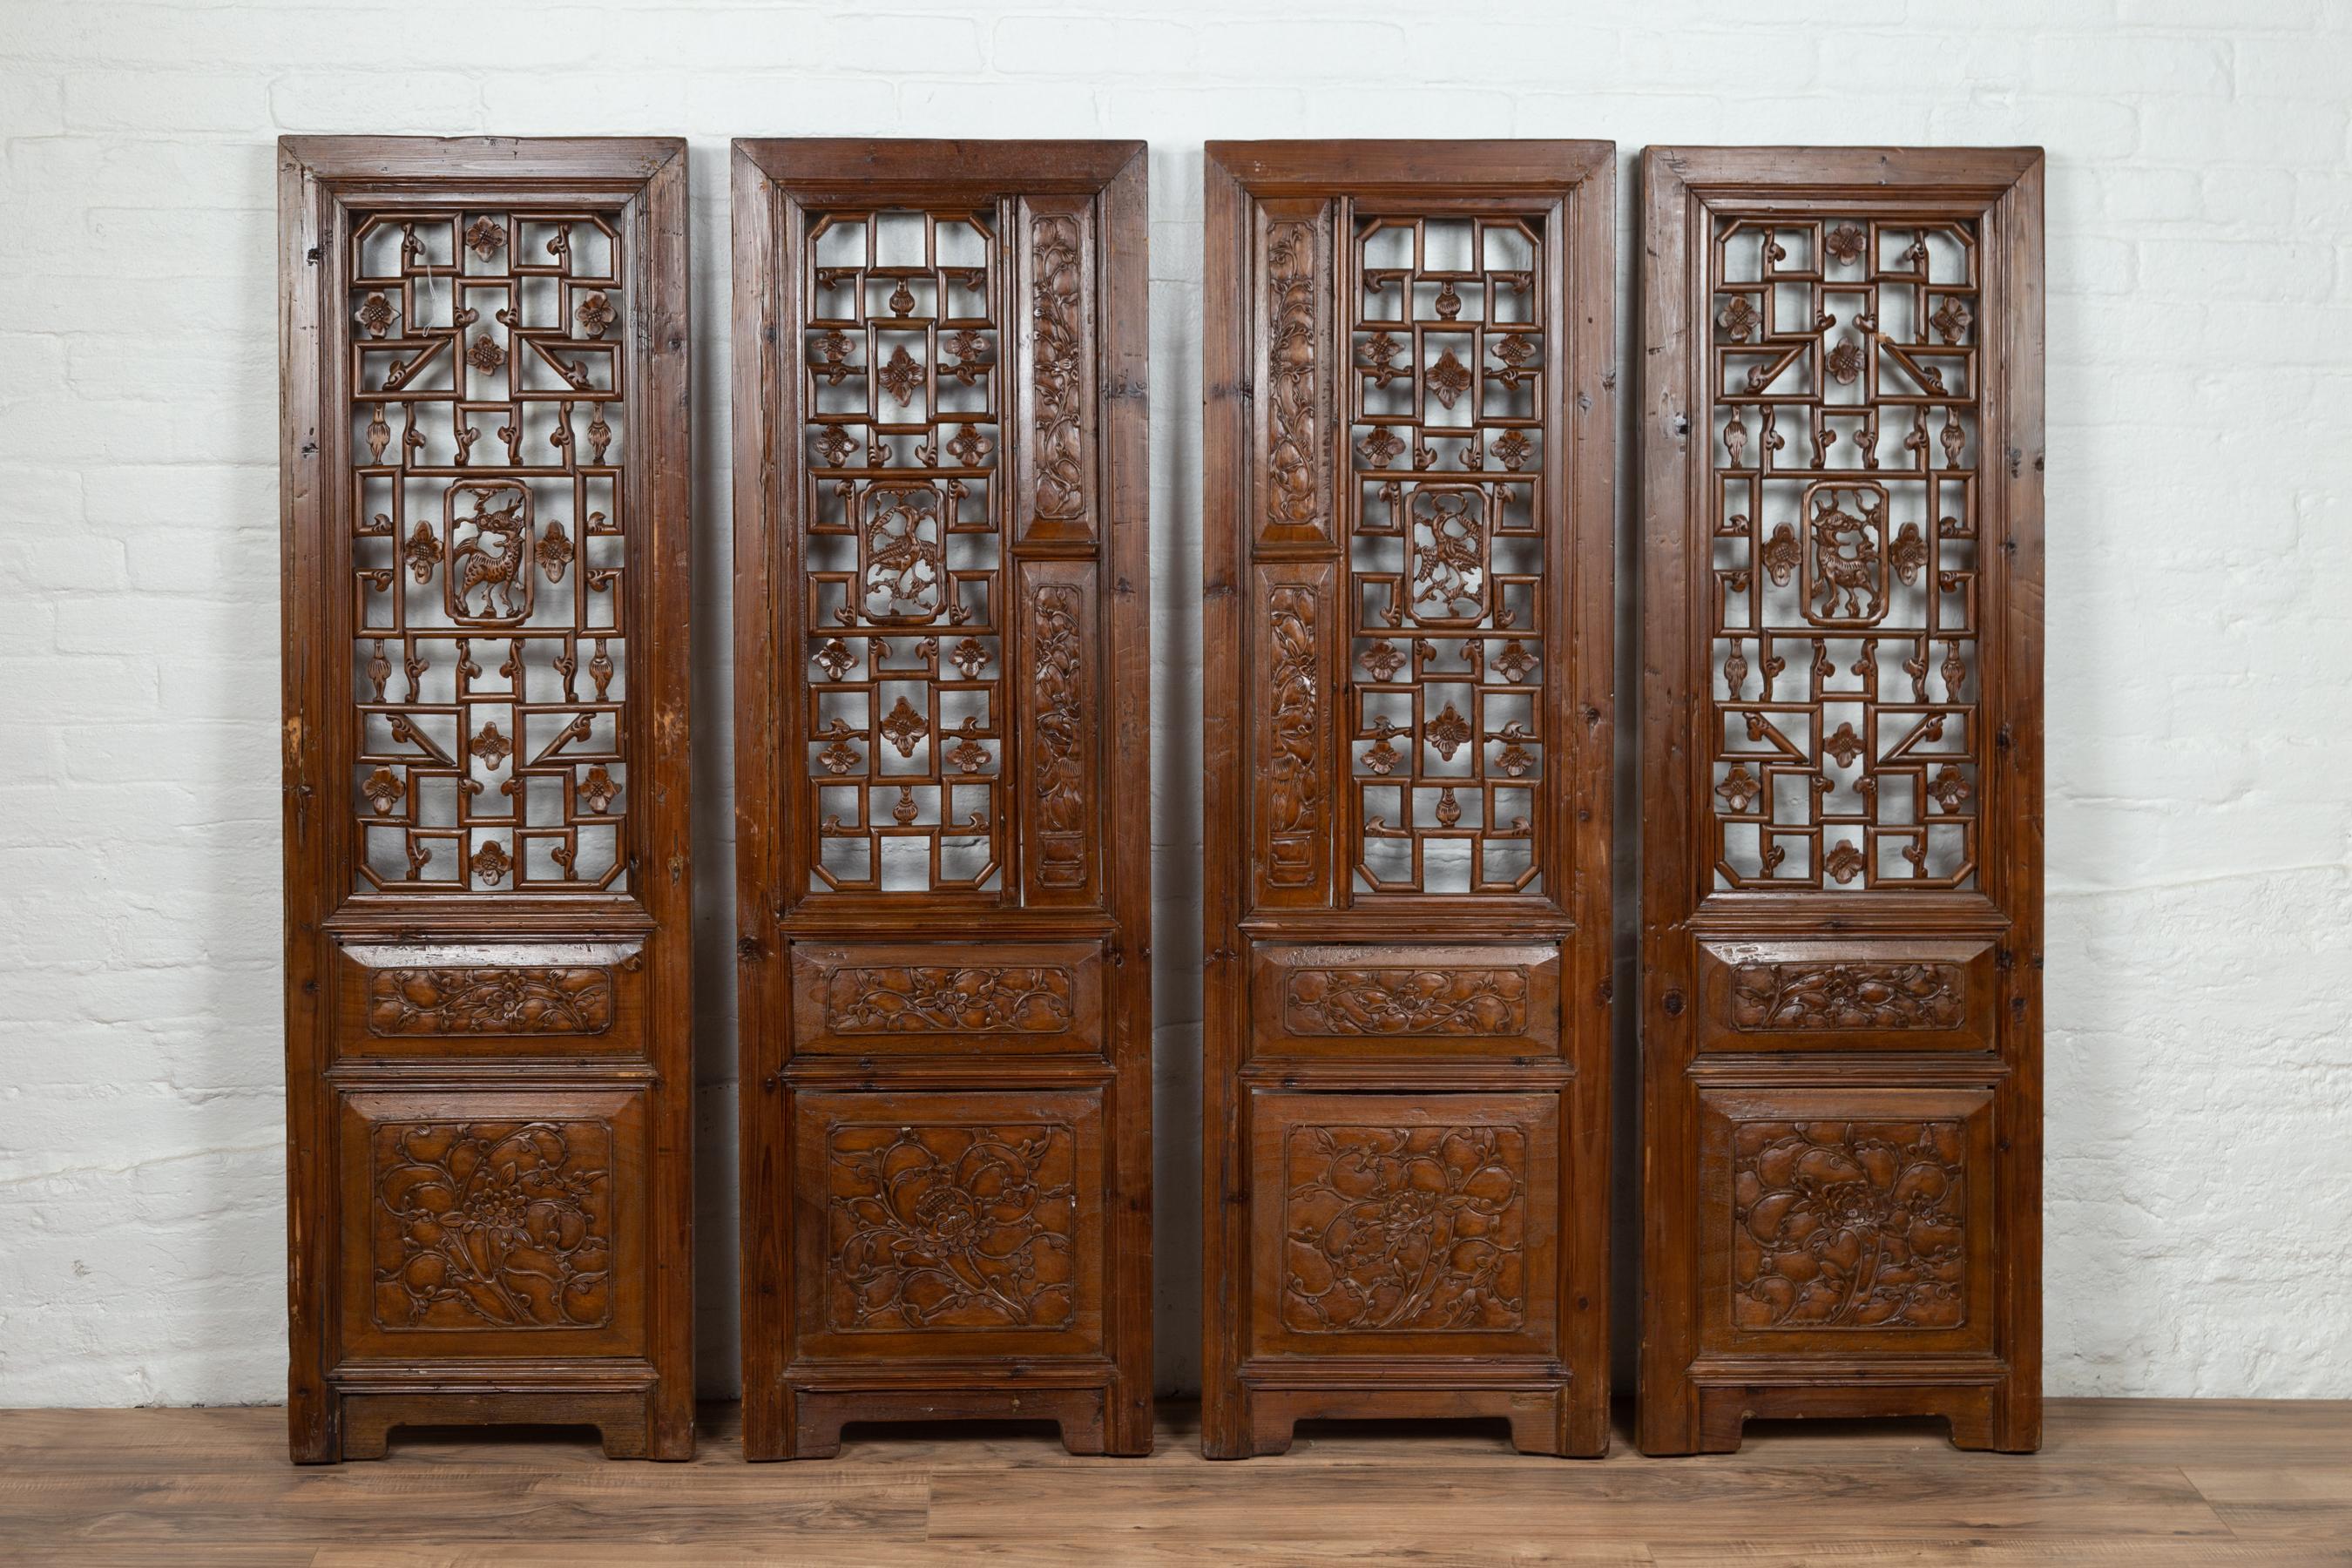 Set of Four Carved Elm Screen Panels with Fretwork, Foliage and Floral Motifs For Sale 6